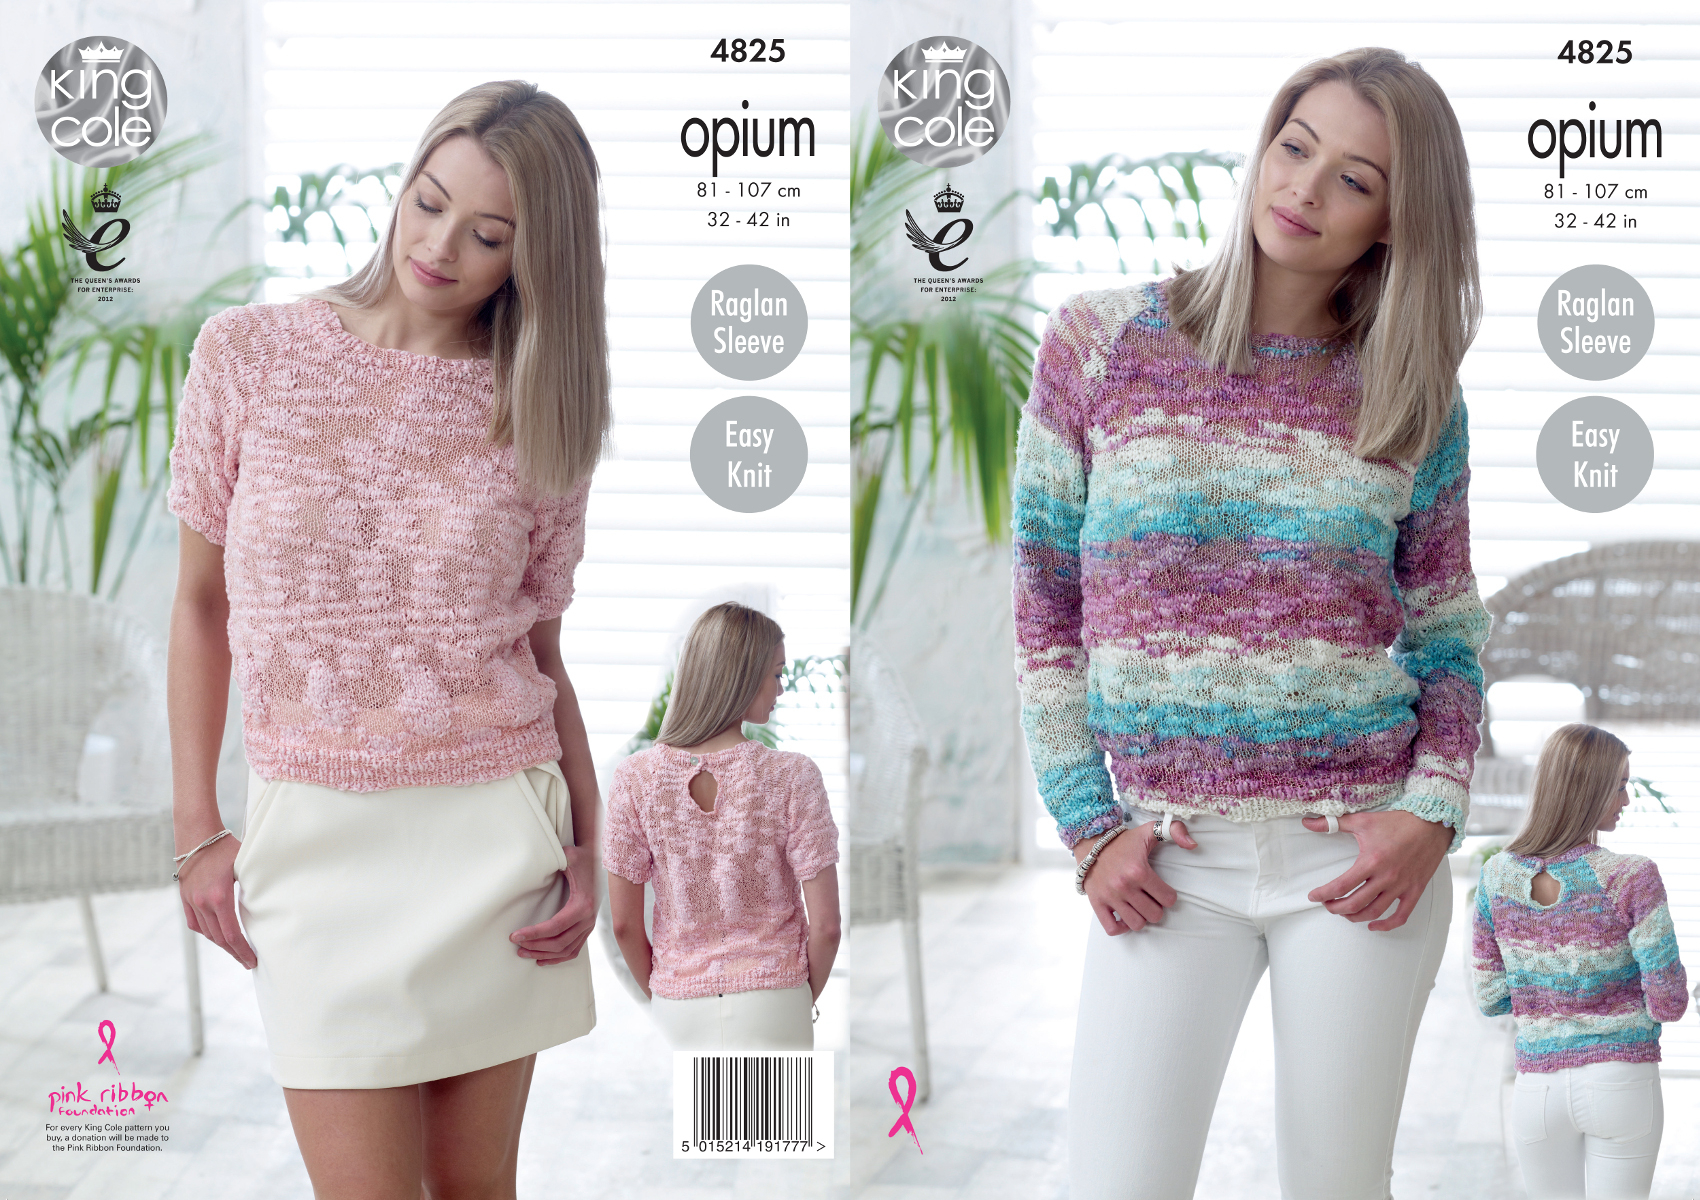 Easy Jumper Knitting Pattern Details About Easy Knit Sweater Jumper Ladies Knitting Pattern King Cole Opium Womens 4825